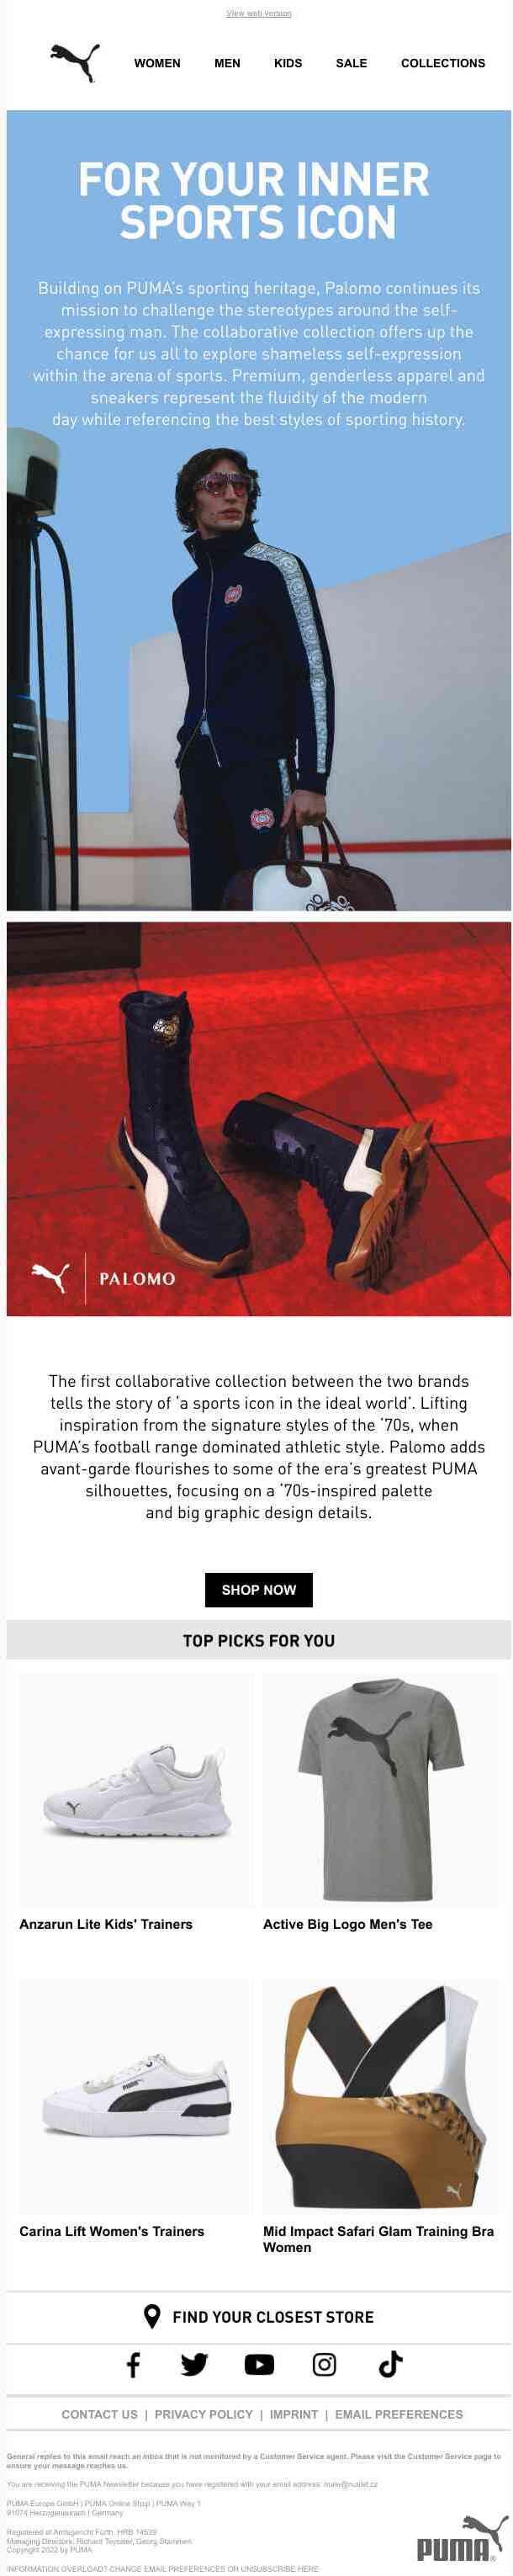 NEW: PUMA x PALOMO, A Collection For Your Inner Icon